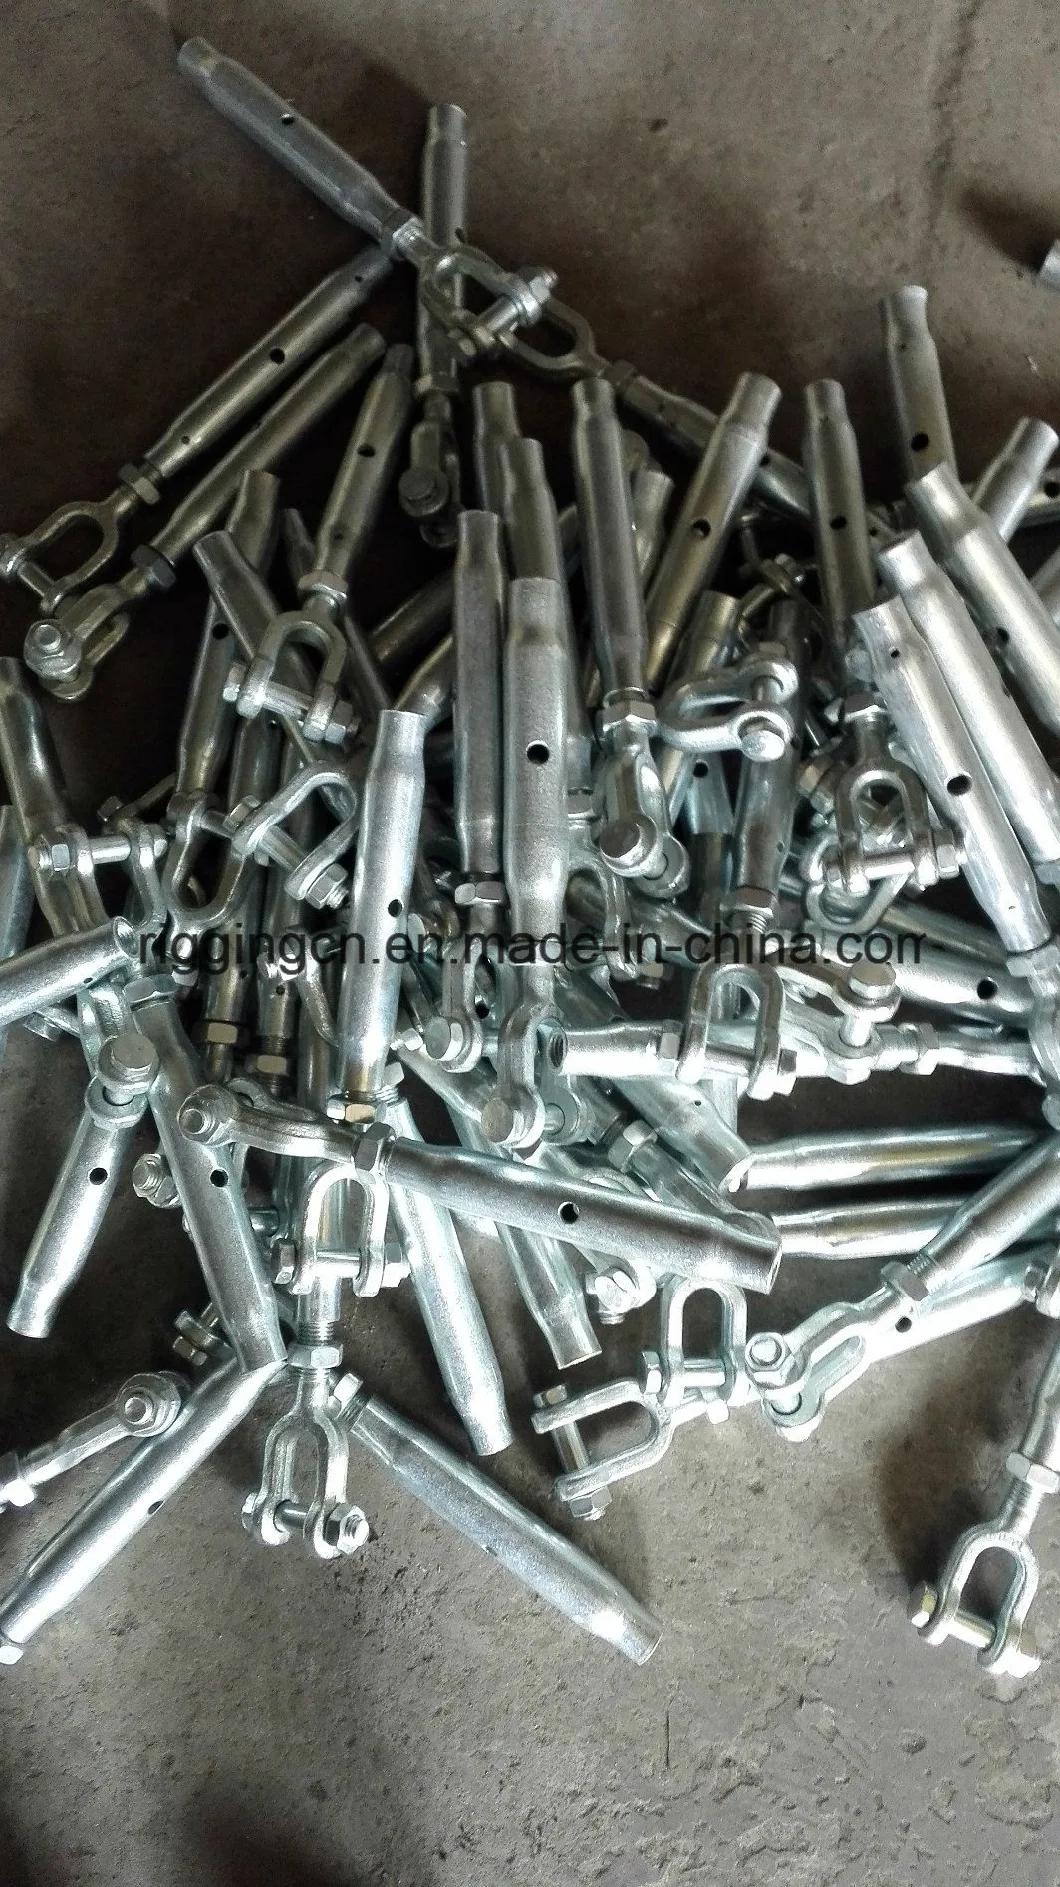 Factory Selling DIN1478 Steel Turnbuckle Tube Closed Body